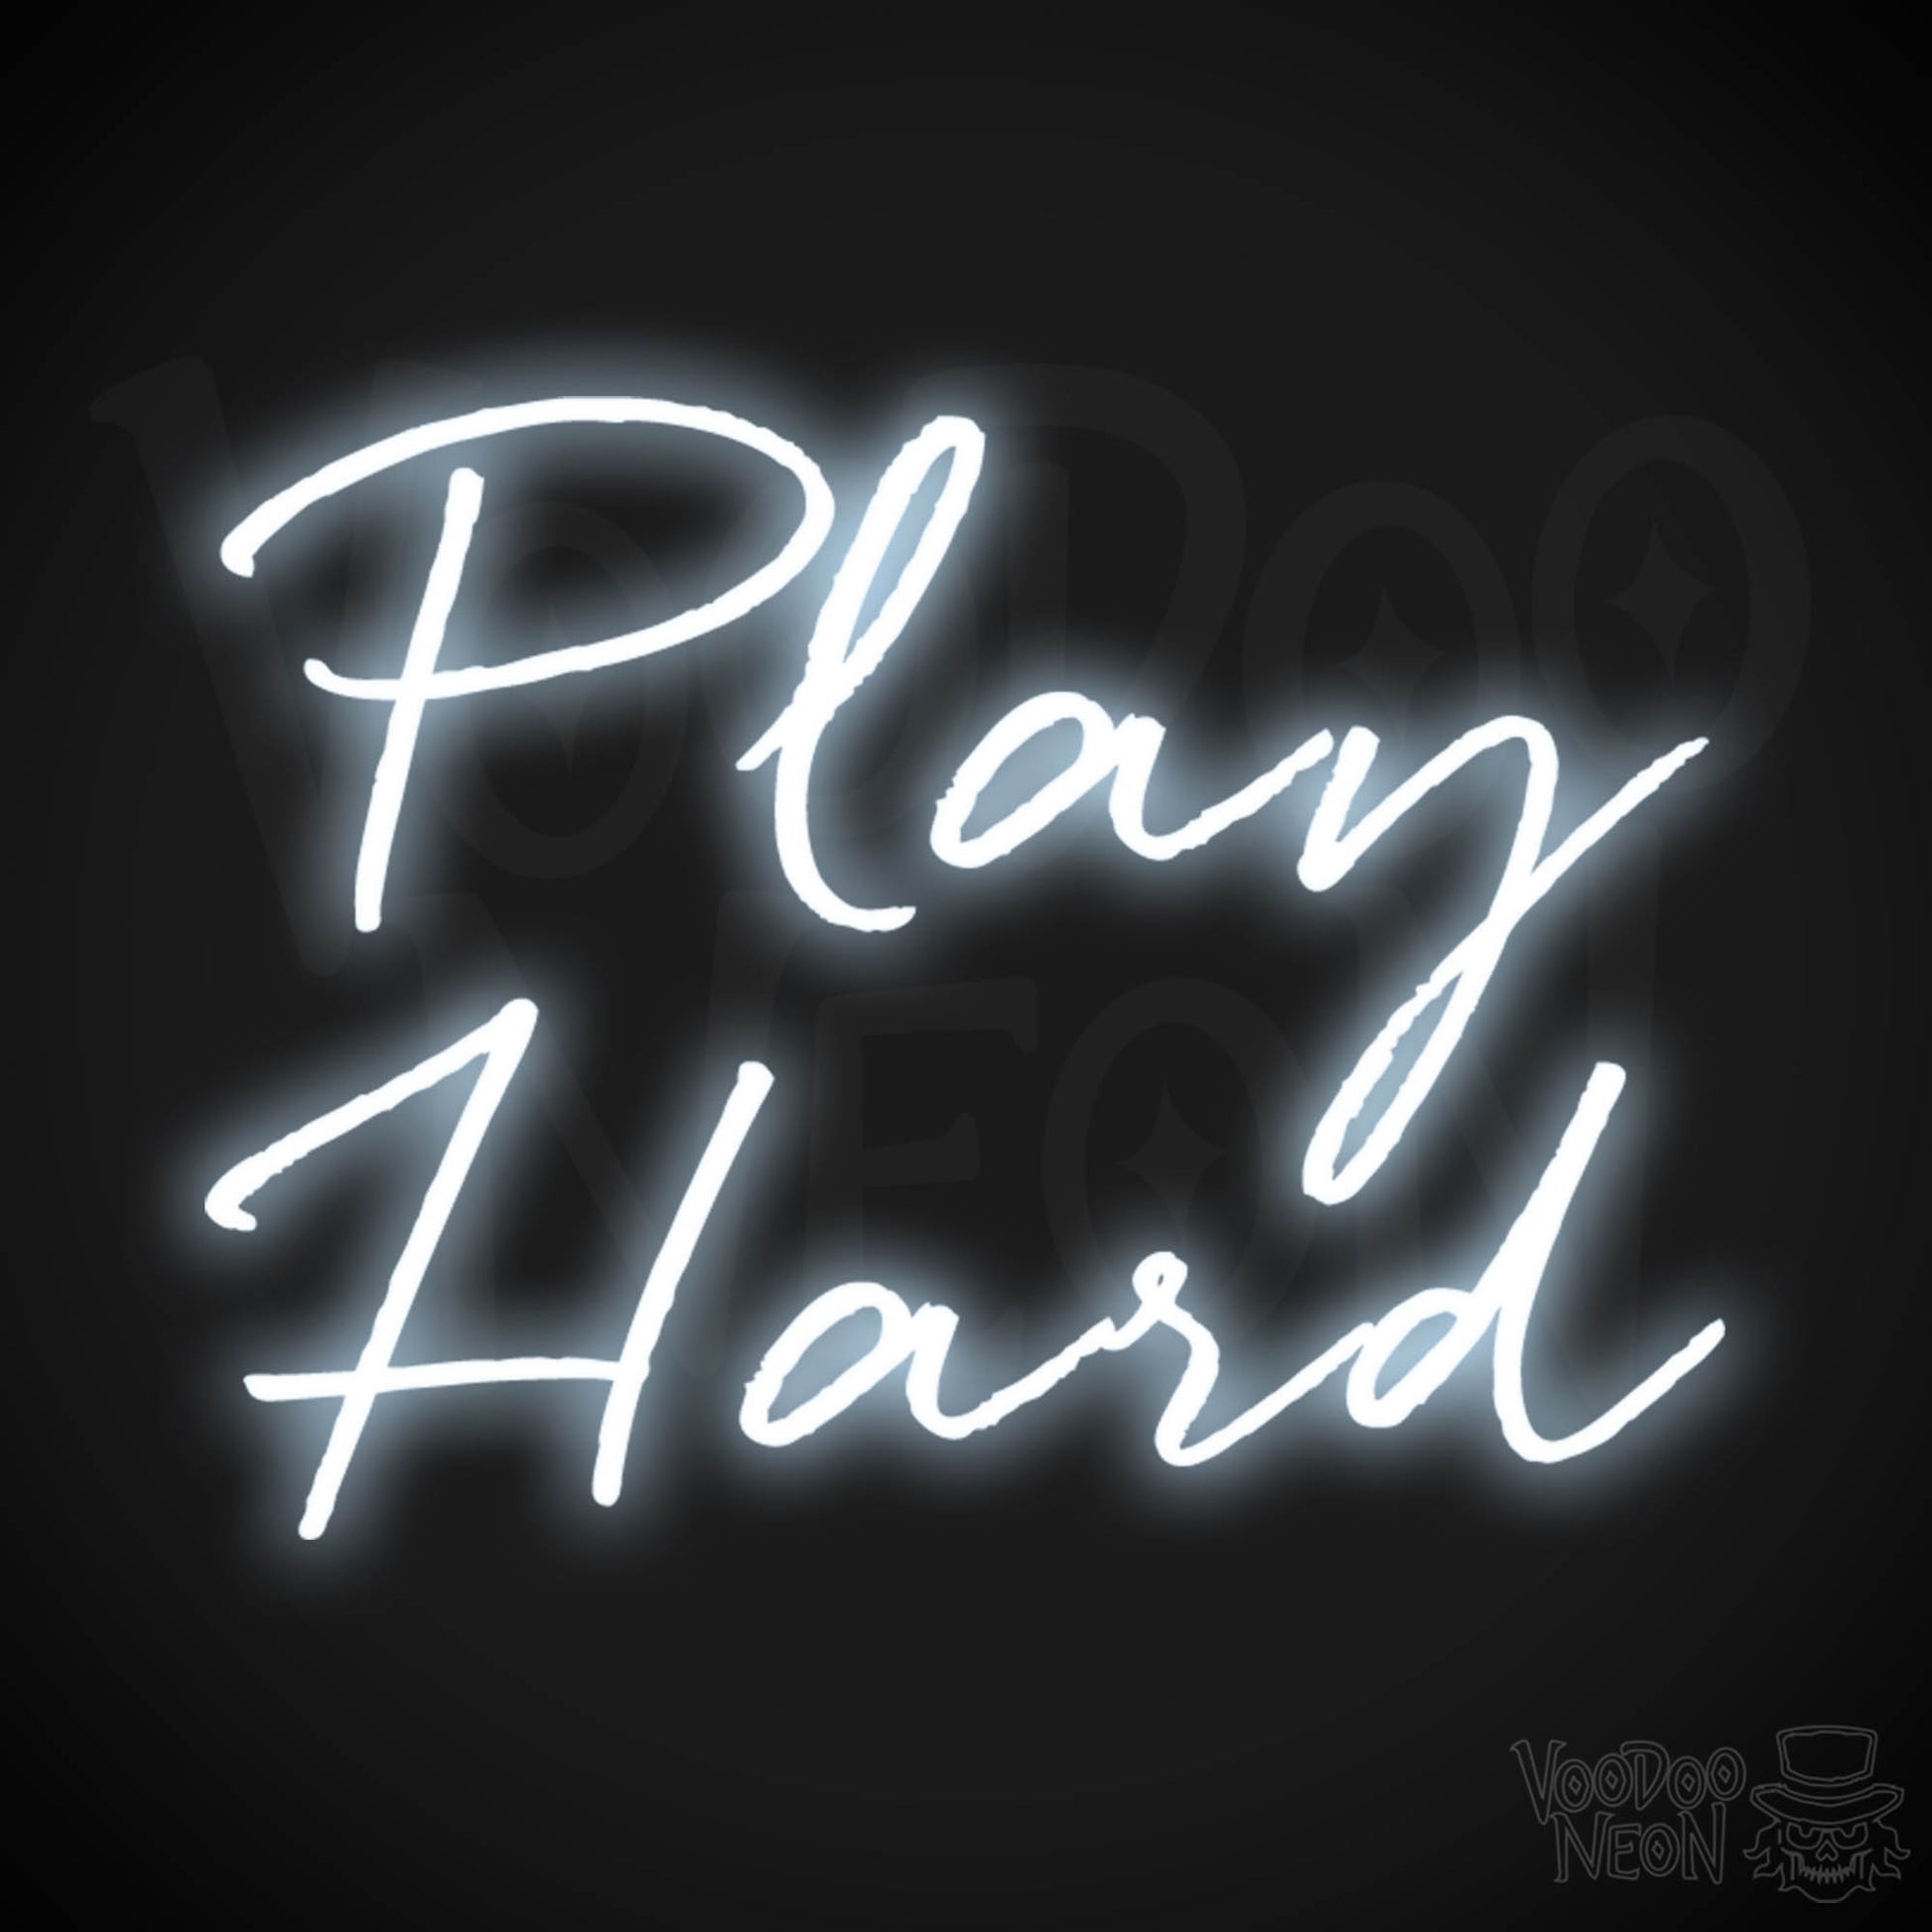 Play Hard Neon Sign - Neon Play Hard Sign - Play Hard LED Sign - Color Cool White